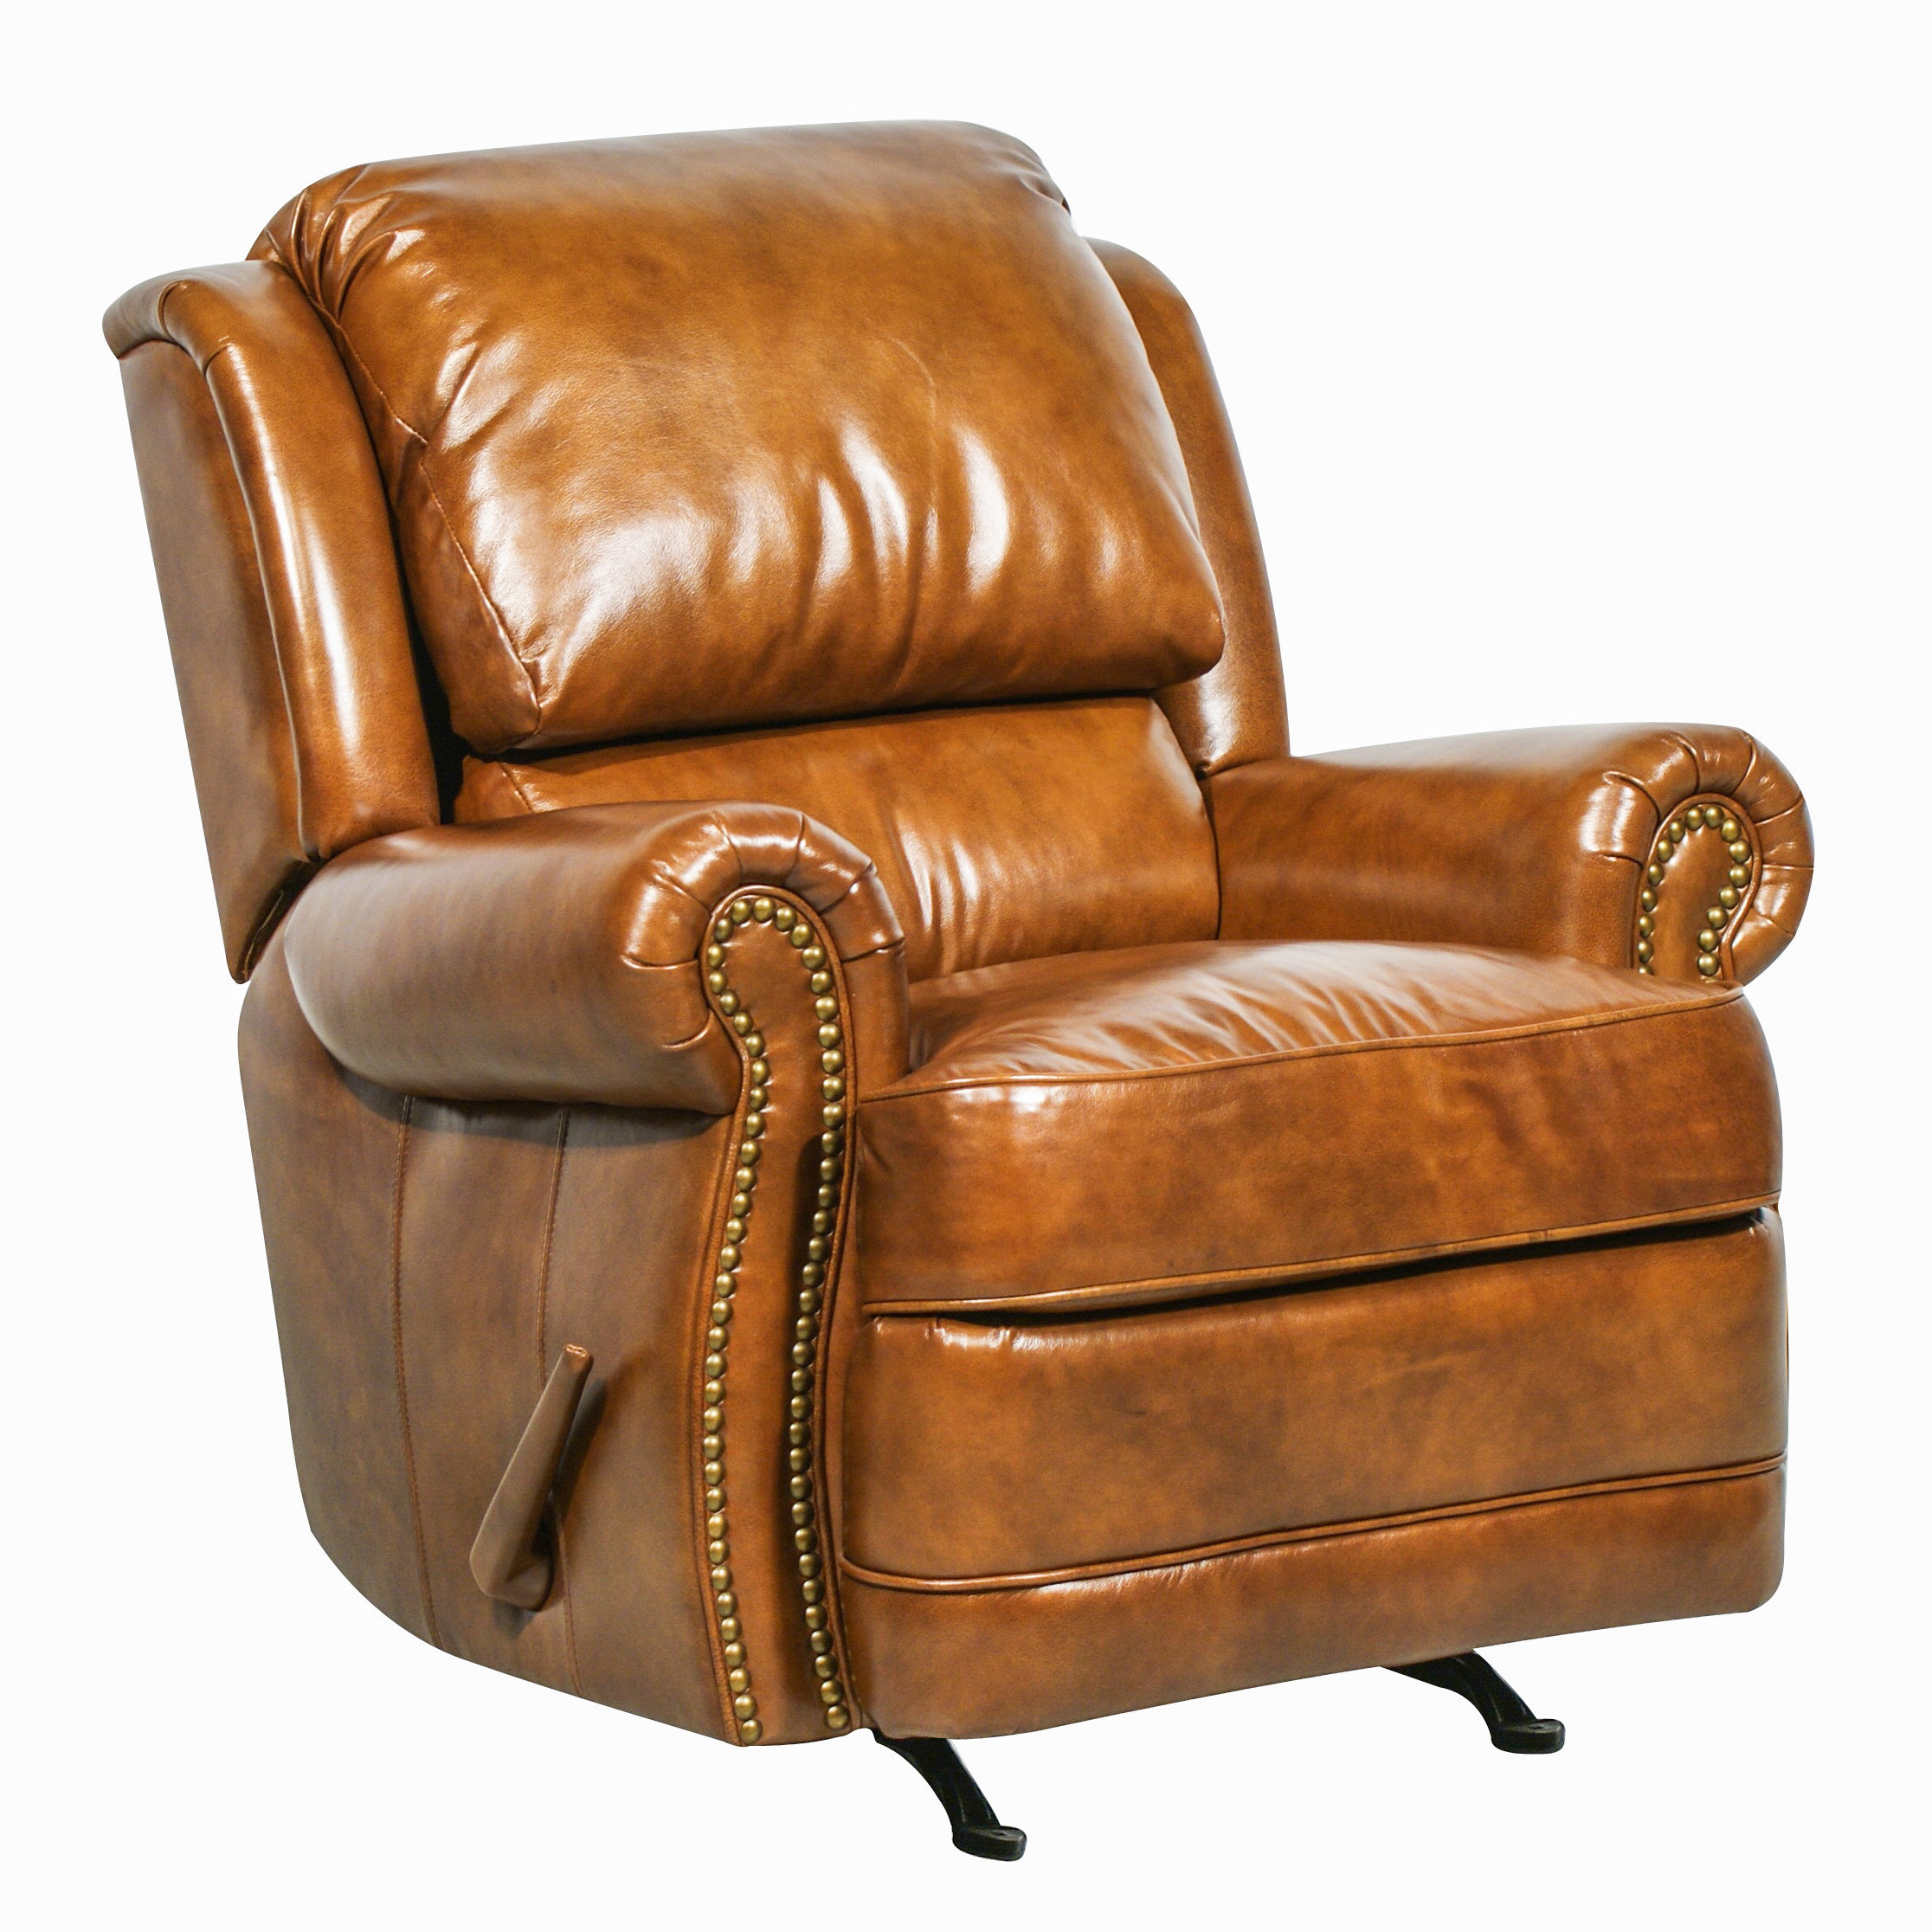 Luxurious Leather Recliner Chairs